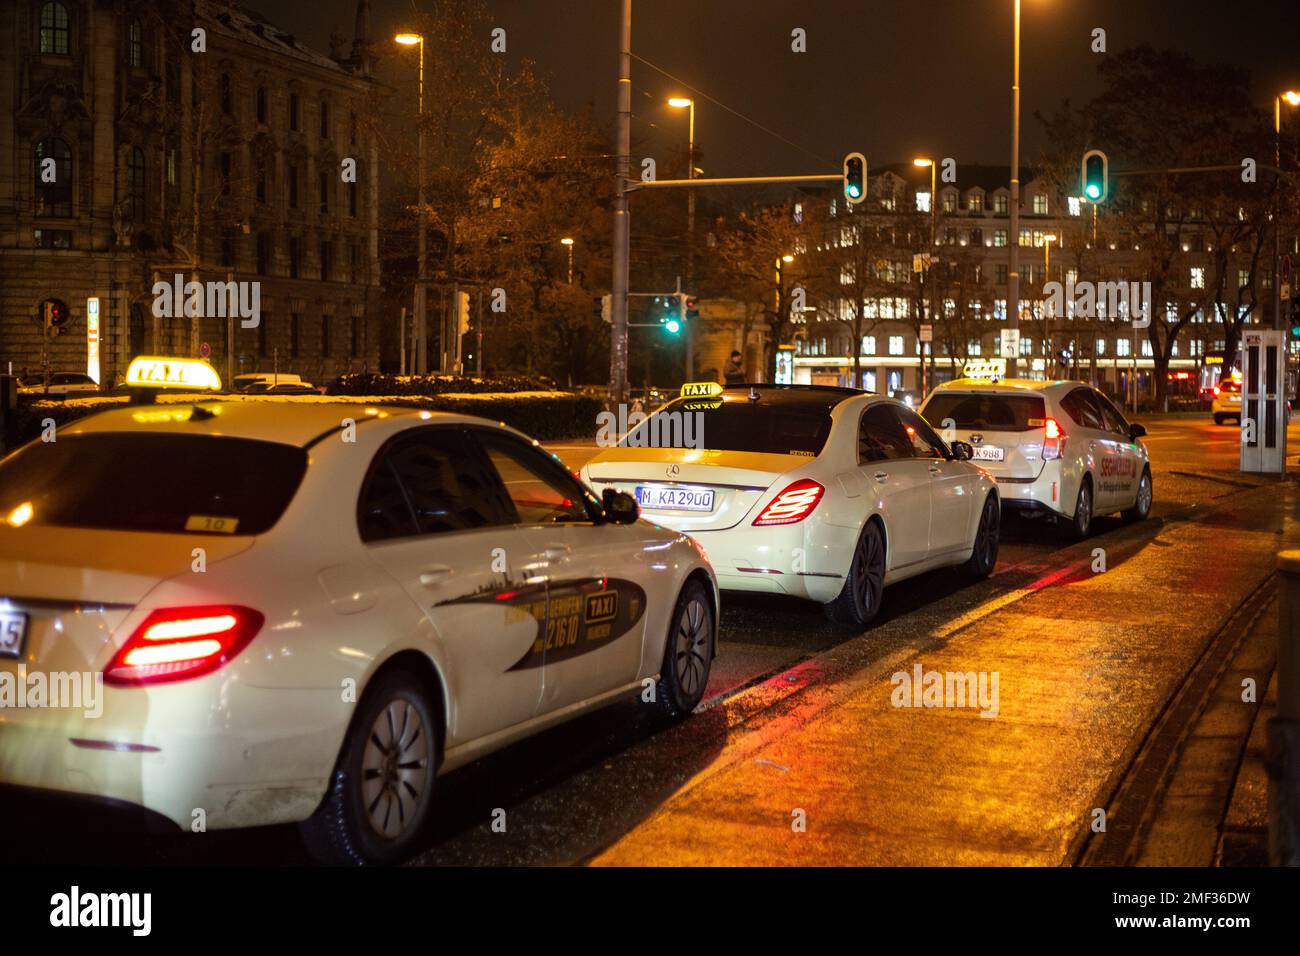 Munich, Germany. 24th Jan, 2023. Several cabs are waiting at a taxi stand. In many stores in Munich, Germany there are winter sales up to 70% on January 24, 2023. A few people use the sales and buy some fashion items. (Photo by Alexander Pohl/Sipa USA) Credit: Sipa USA/Alamy Live News Stock Photo